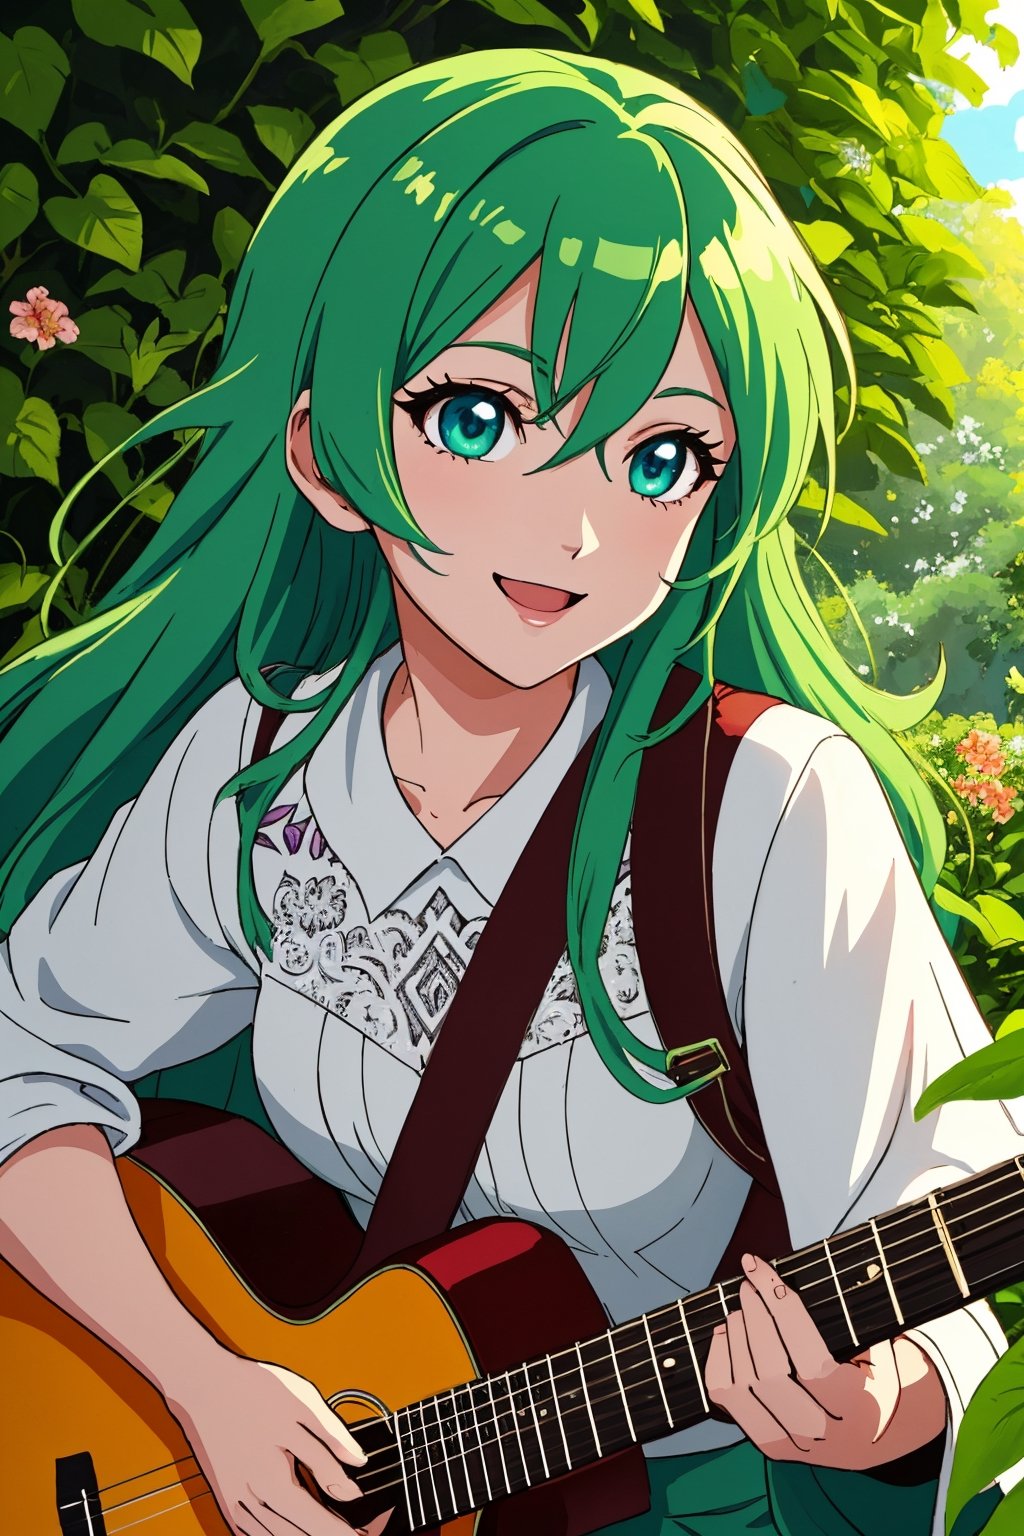 (best quality, 4k, highres), vibrant colors, lively atmosphere, anime-style, portraits, beautiful detailed eyes, charming smile, long flowing hair, stylish clothes, confident pose, sunlight filtering through leaves, colorful flowers, lush green garden, intricate guitar details, harmonious composition, expression of joy and passion.